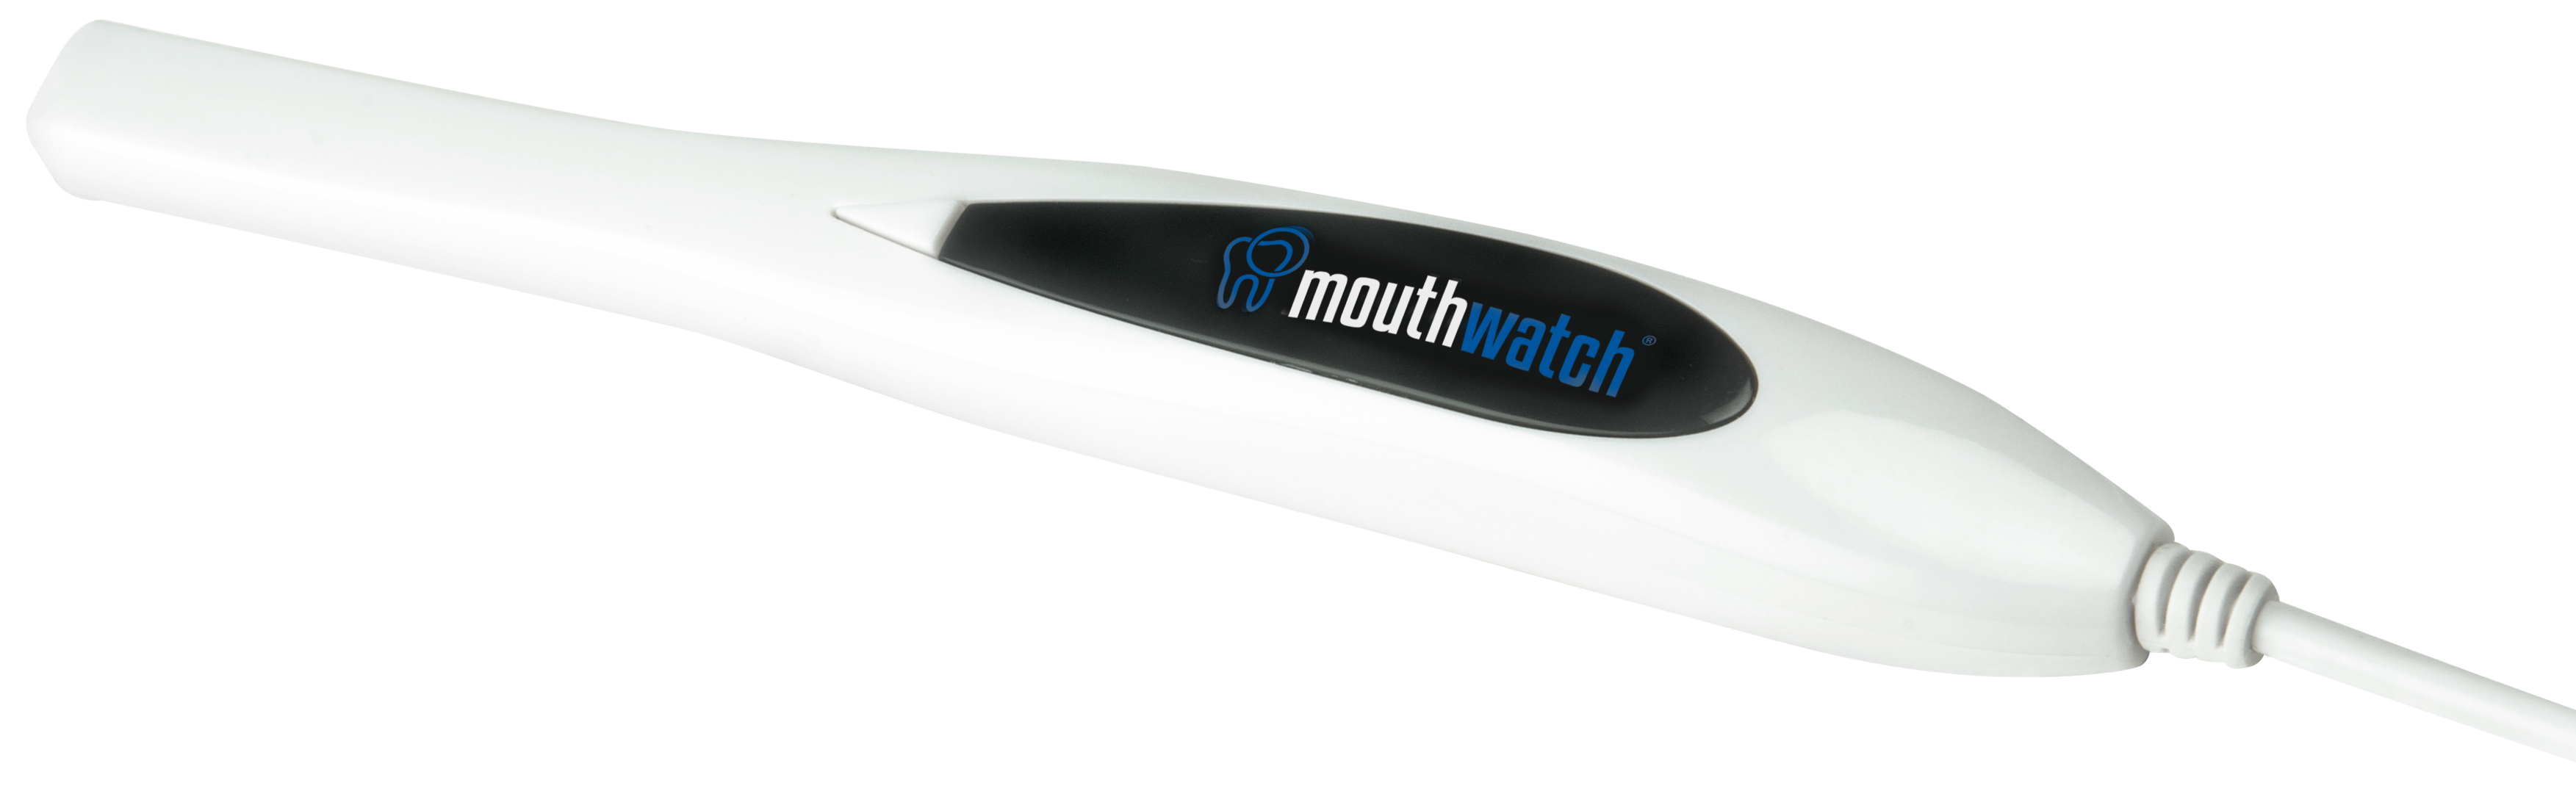 a mouthwatch intraoral camera